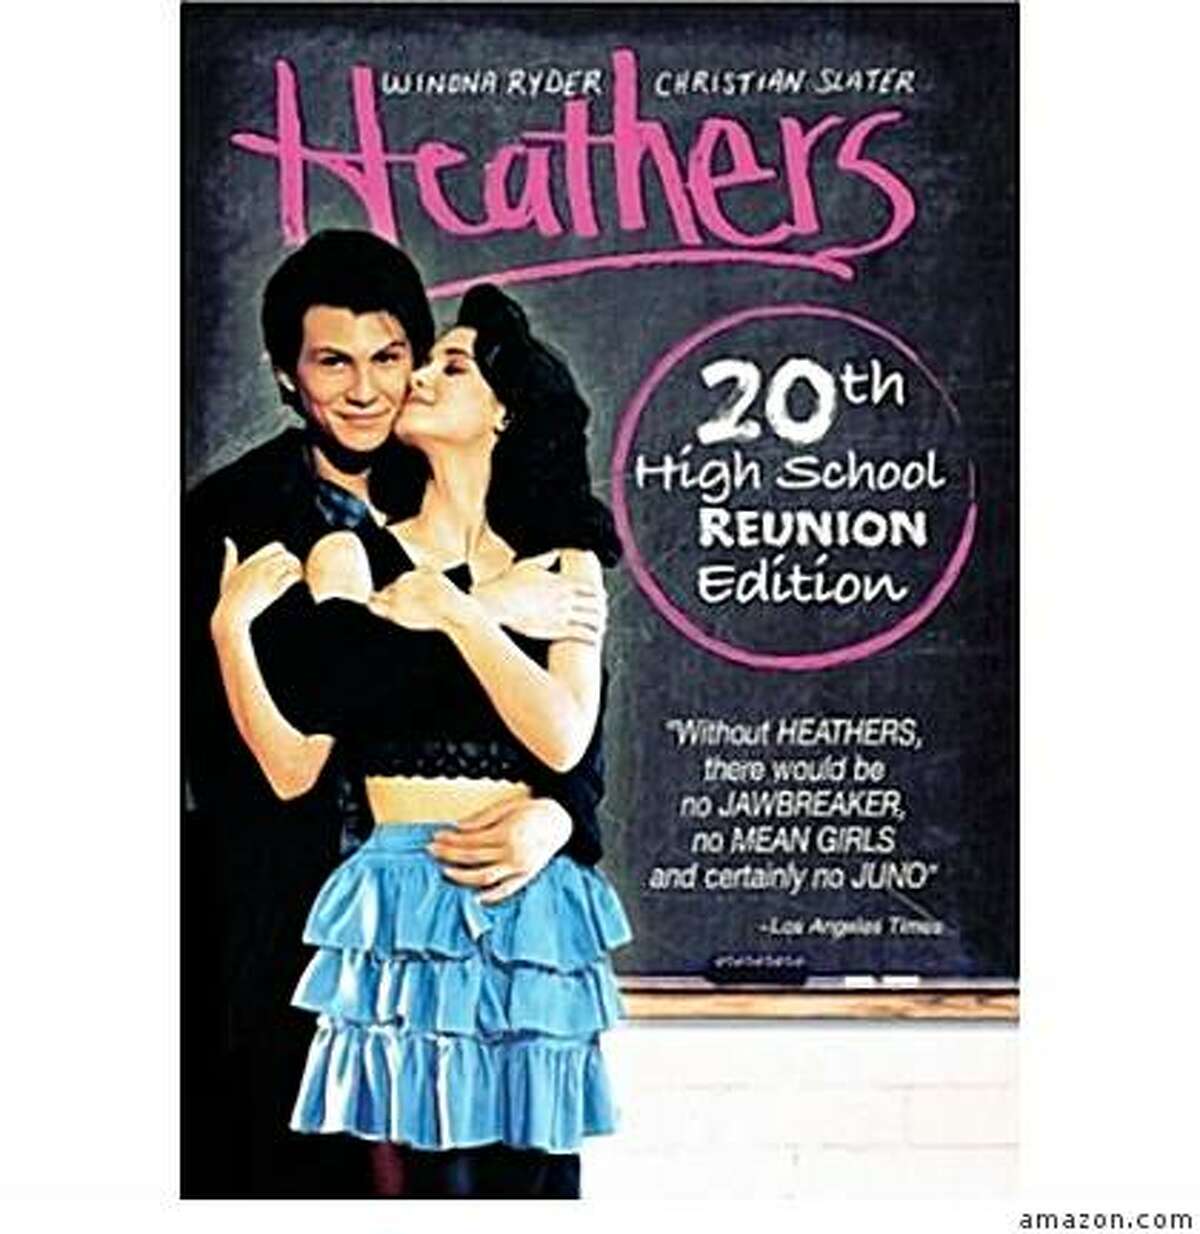 dvd cover: HEATHERS: 20th HIGH SCHOOL REUNION EDITION